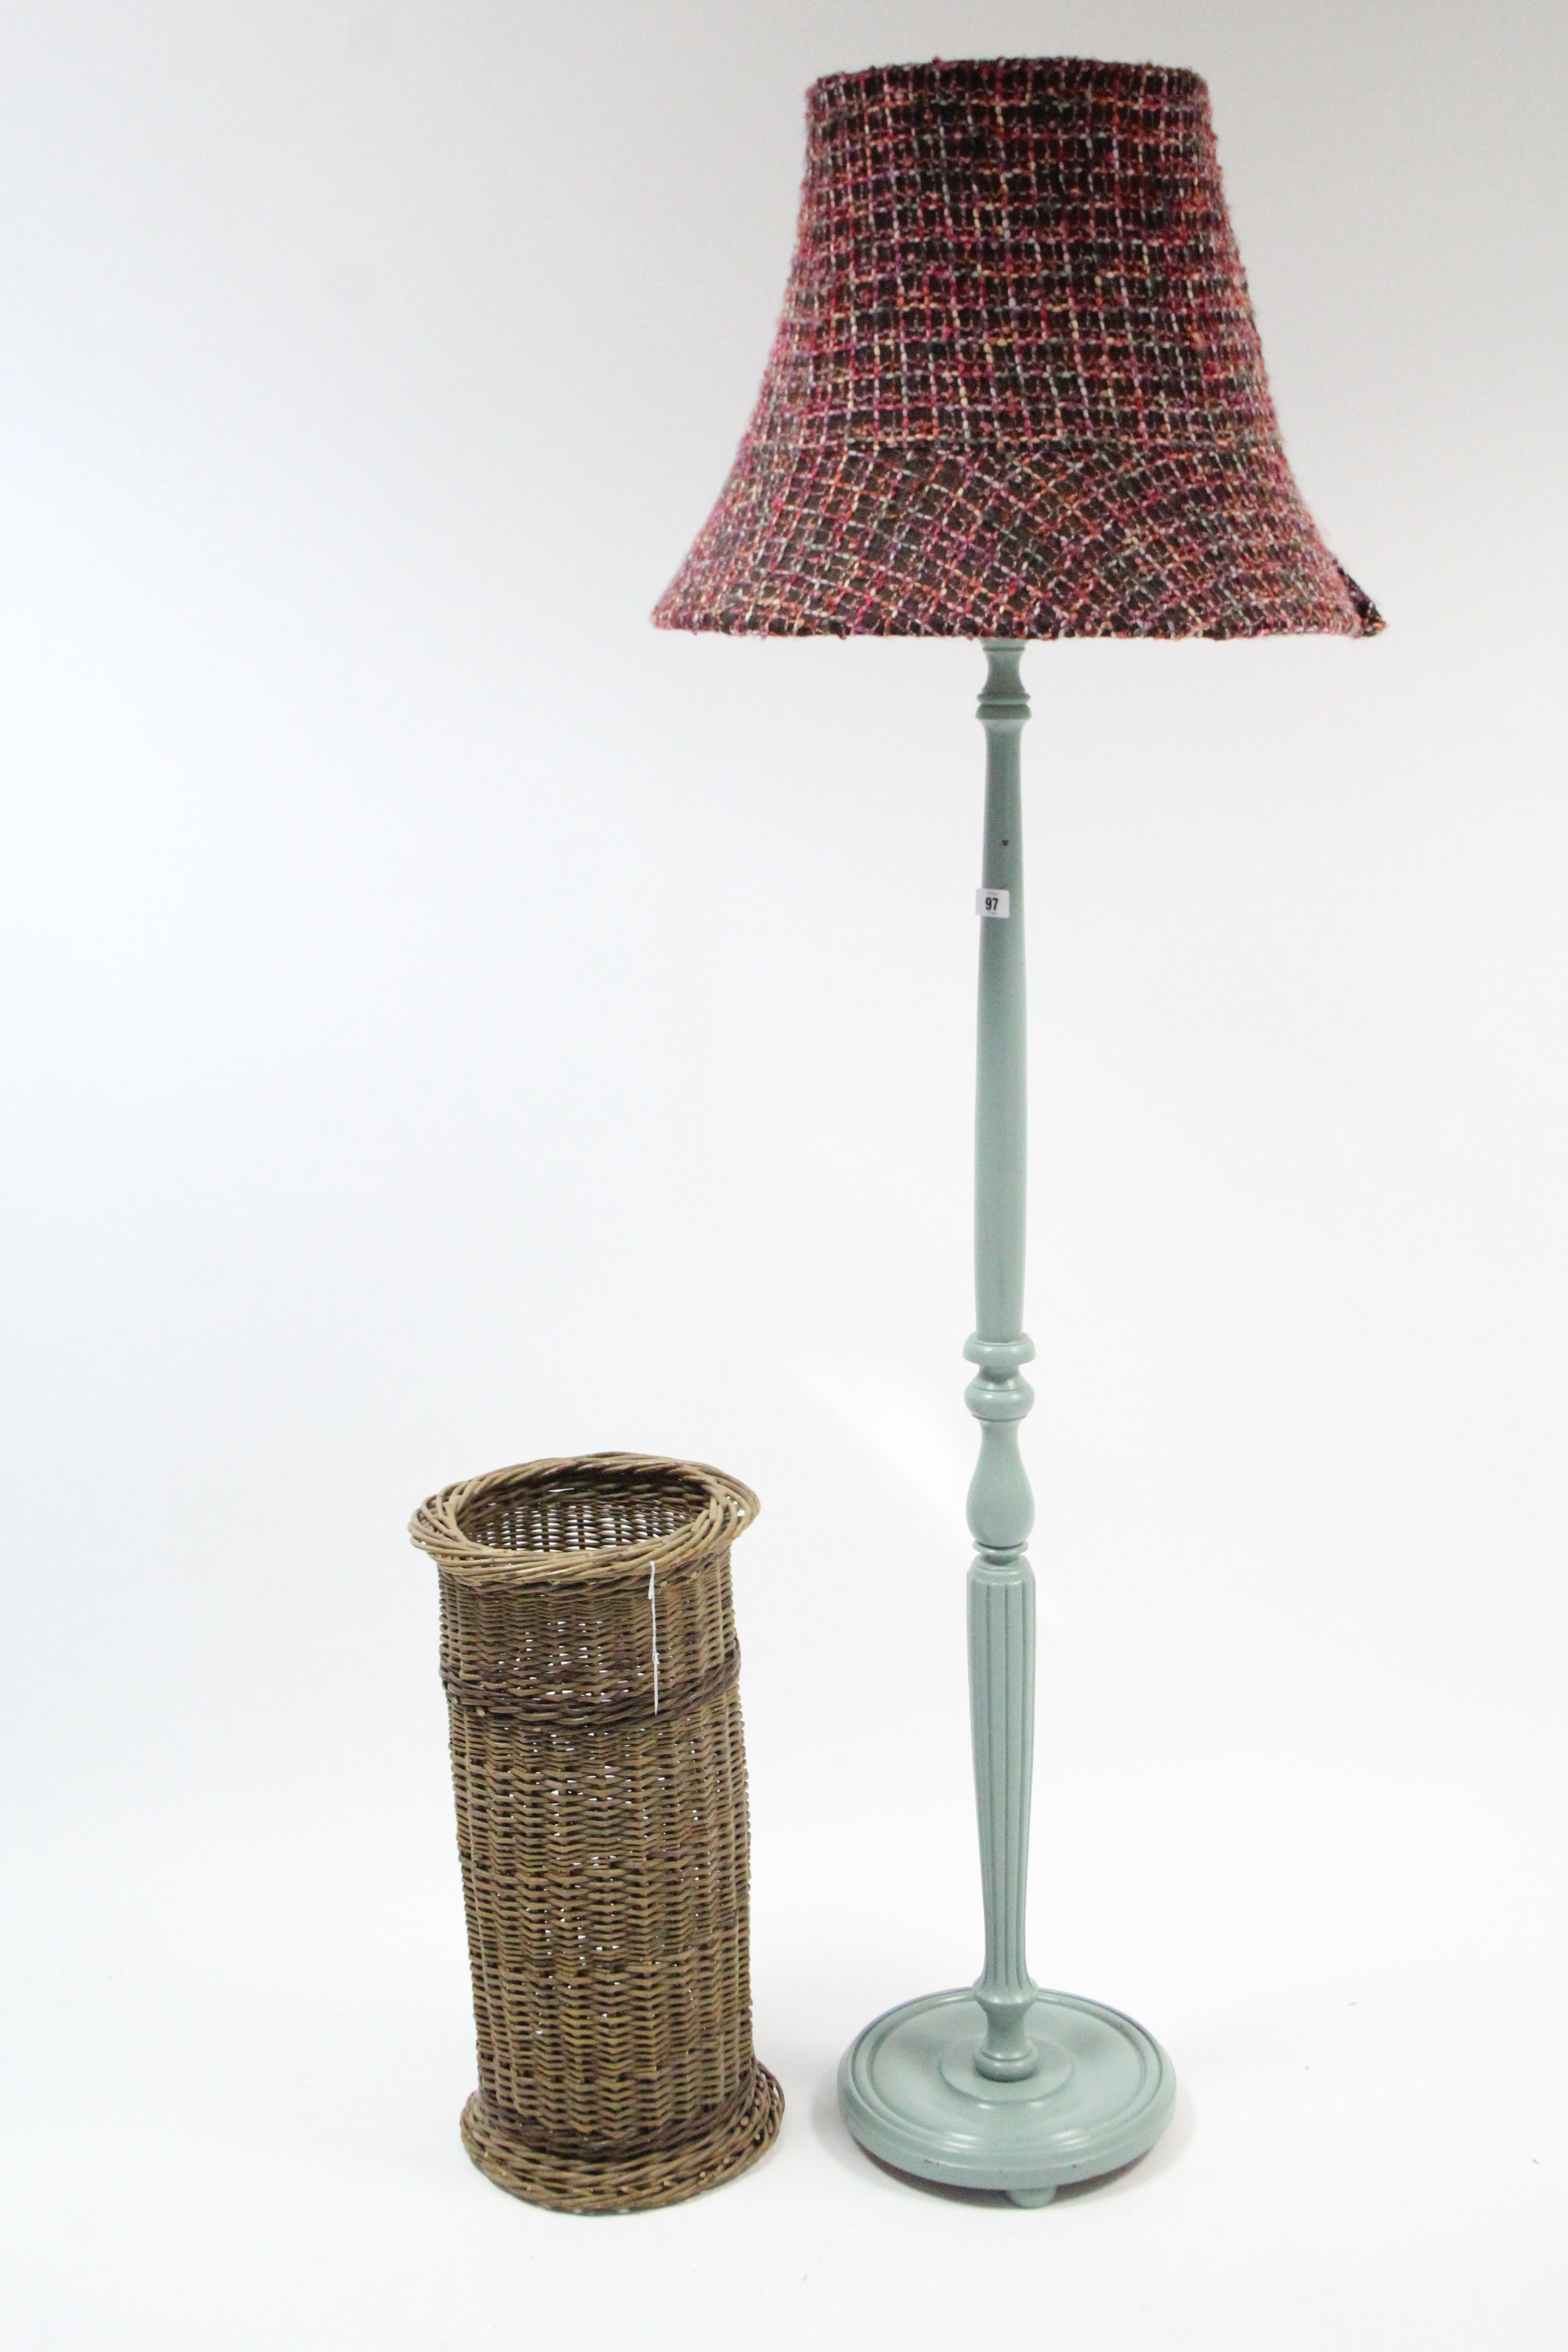 A pale blue painted wooden standard lamp with shade; & a woven-cane cylindrical umbrella stand.